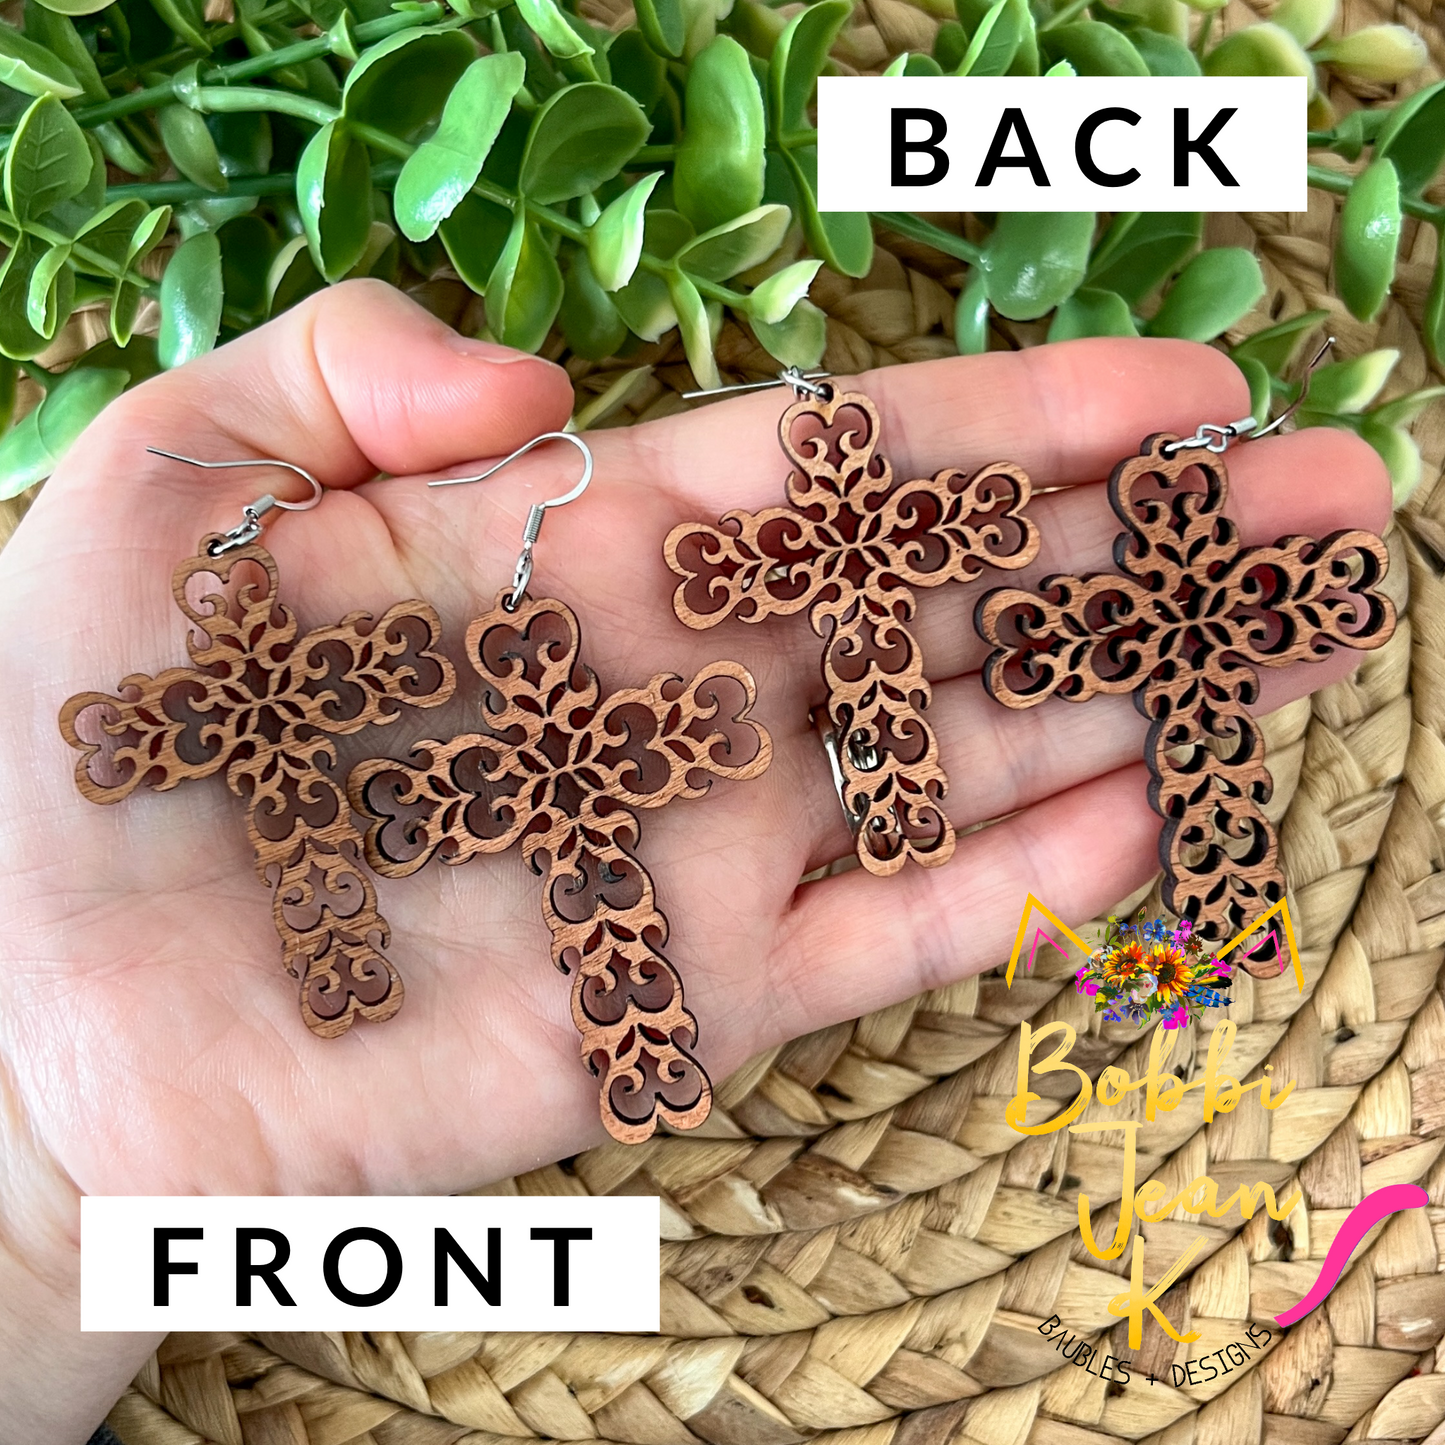 Maple Stained Intricate Wood Cross Earrings: Choose From 2 Sizes - LAST CHANCE